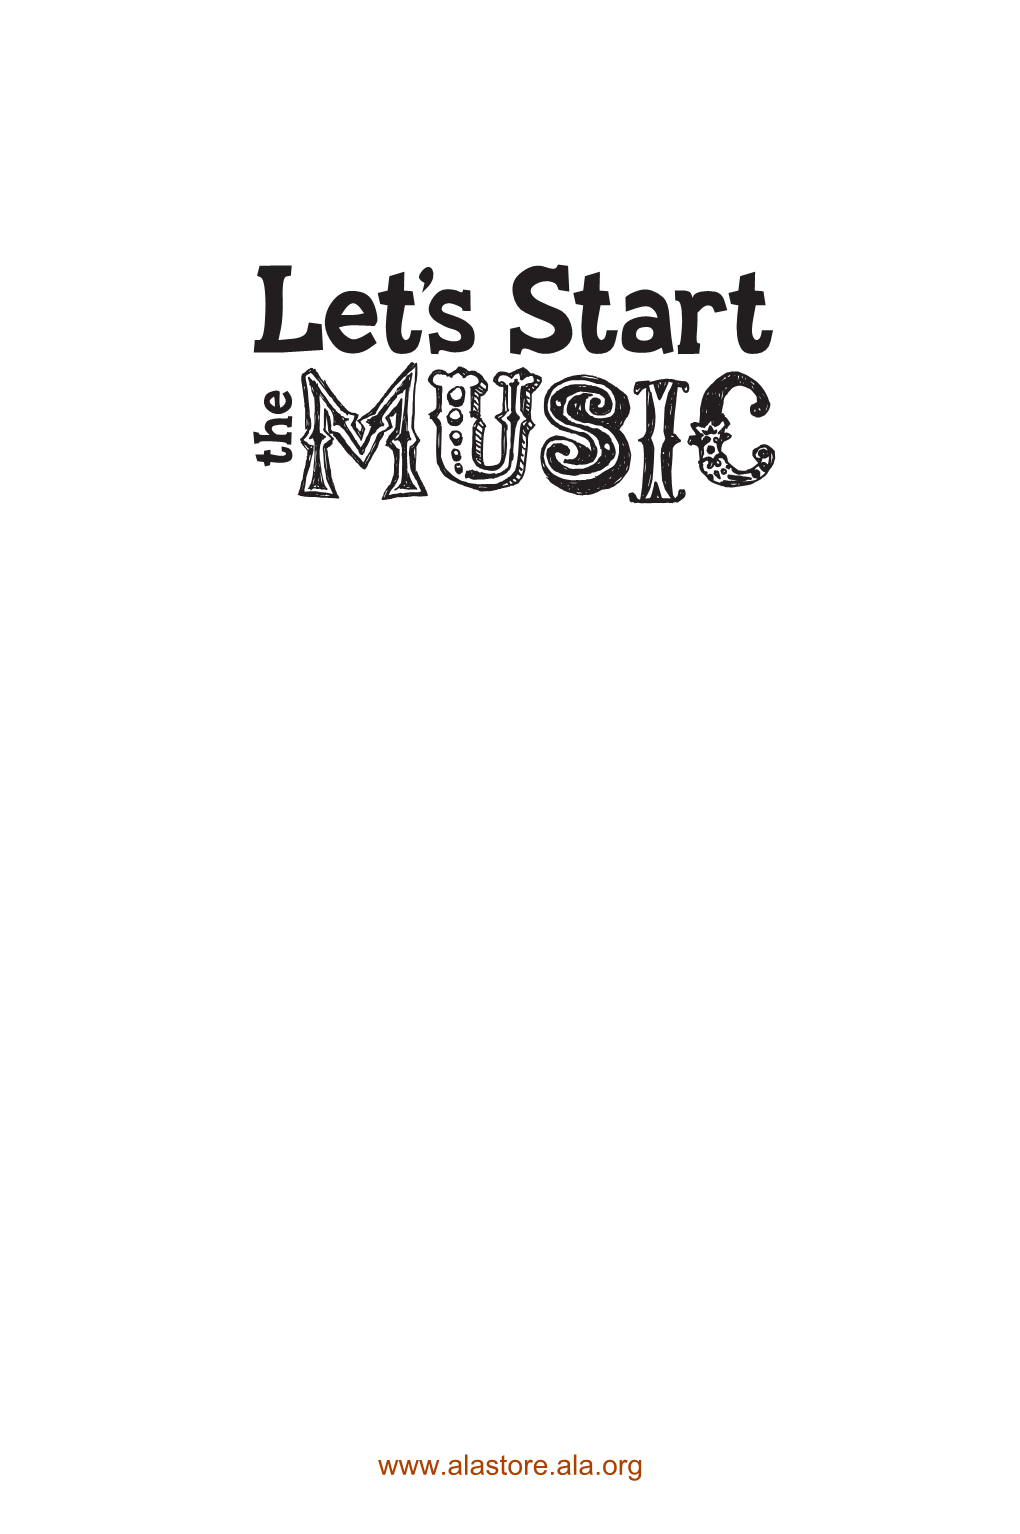 Let's Start the Music: Programming for Primary Grades